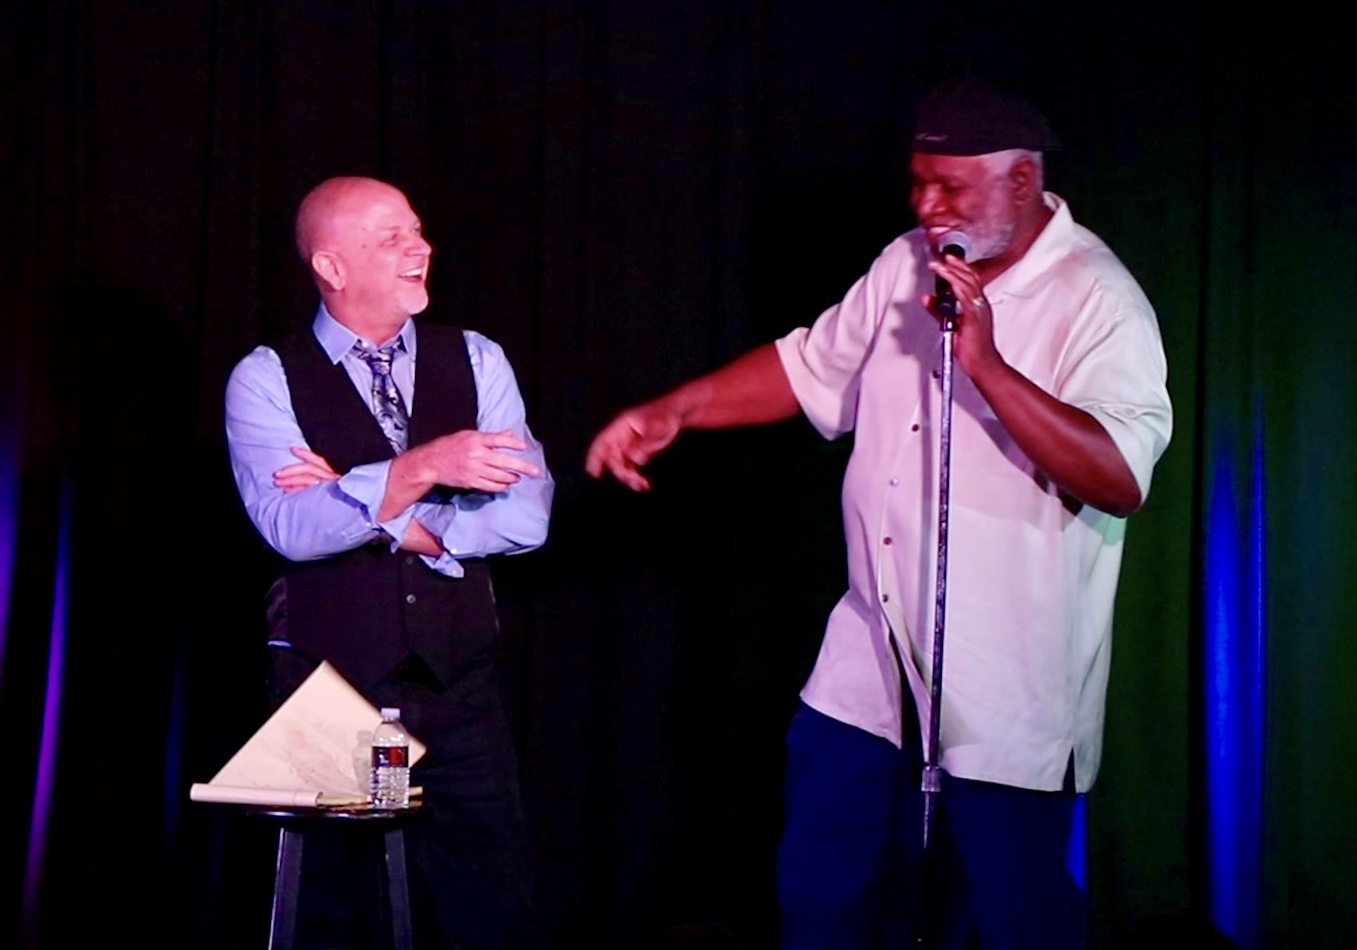 Comedy legend George Wallaces joins Jokesters' resident headliner Don Barnhart onstage for some improvisational fun.